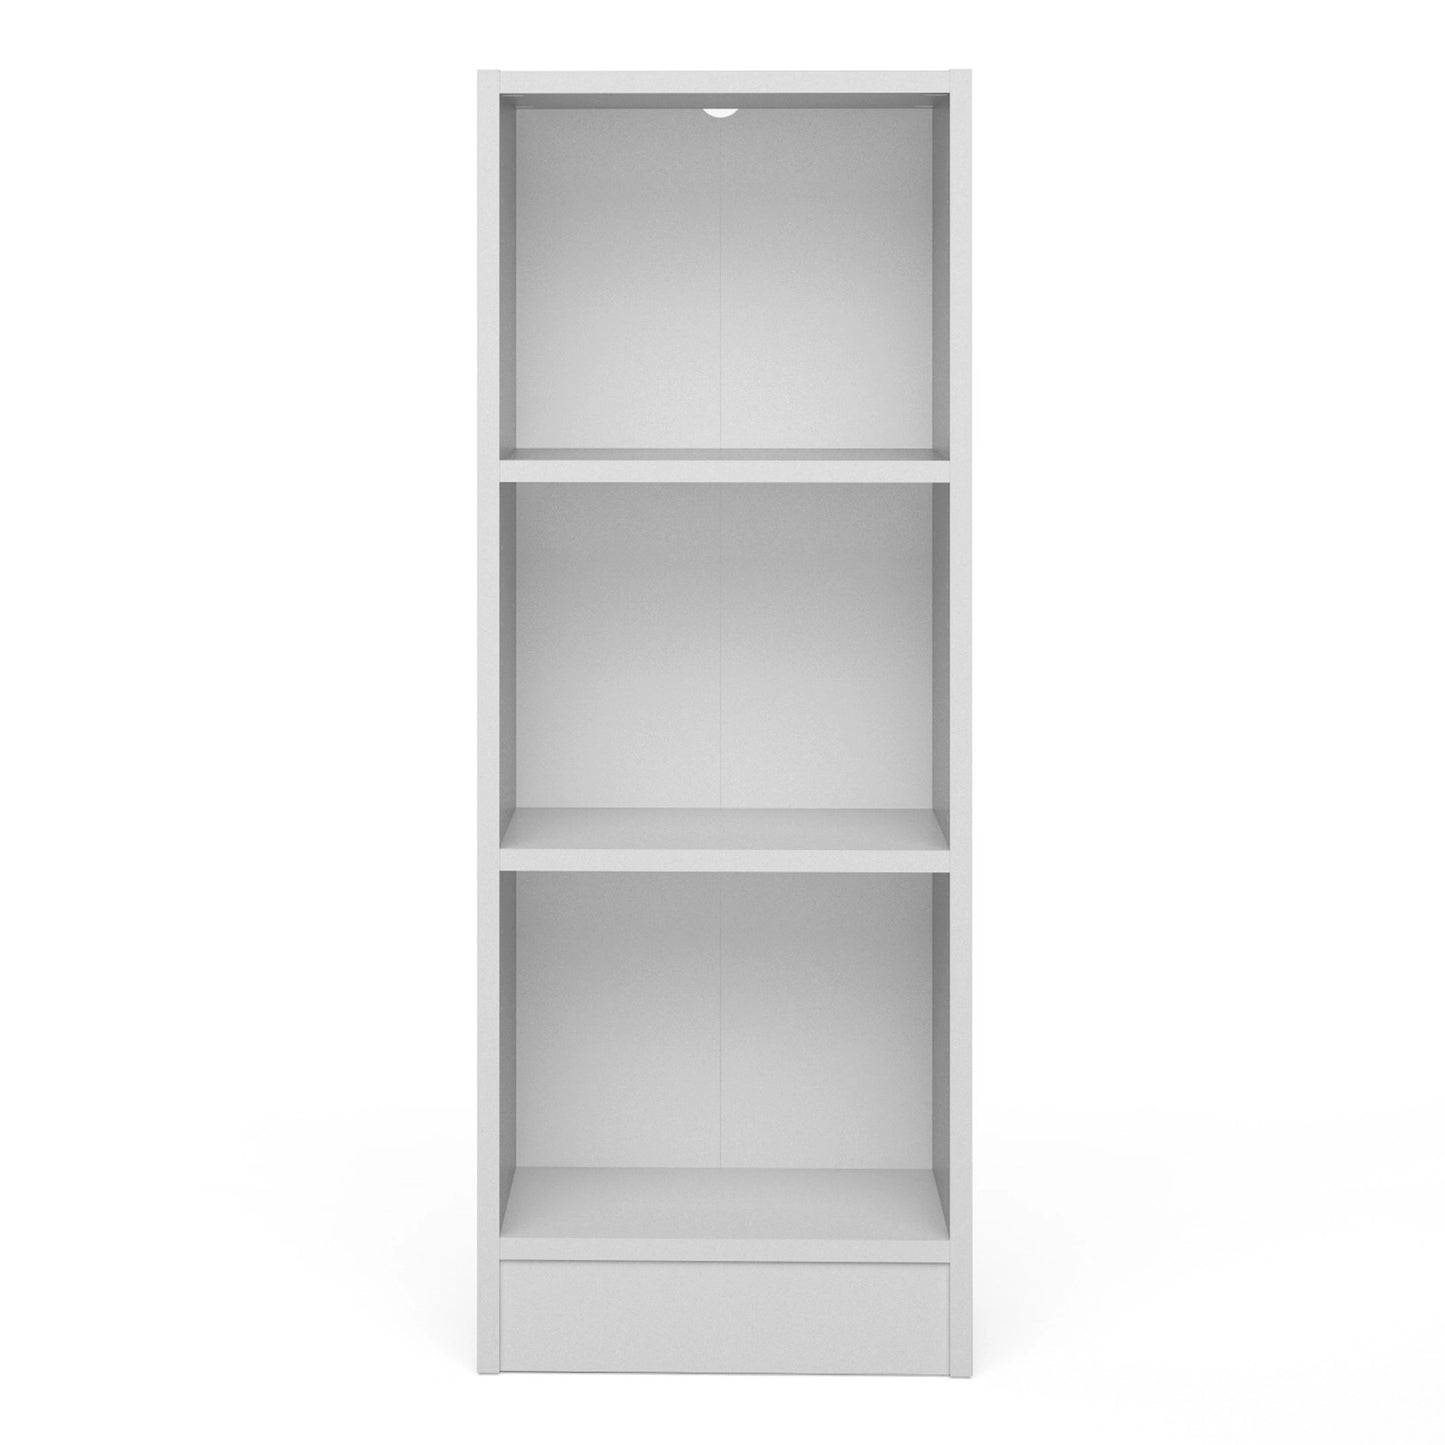 Furniture To Go Basic Low Narrow Bookcase (2 Shelves) in White